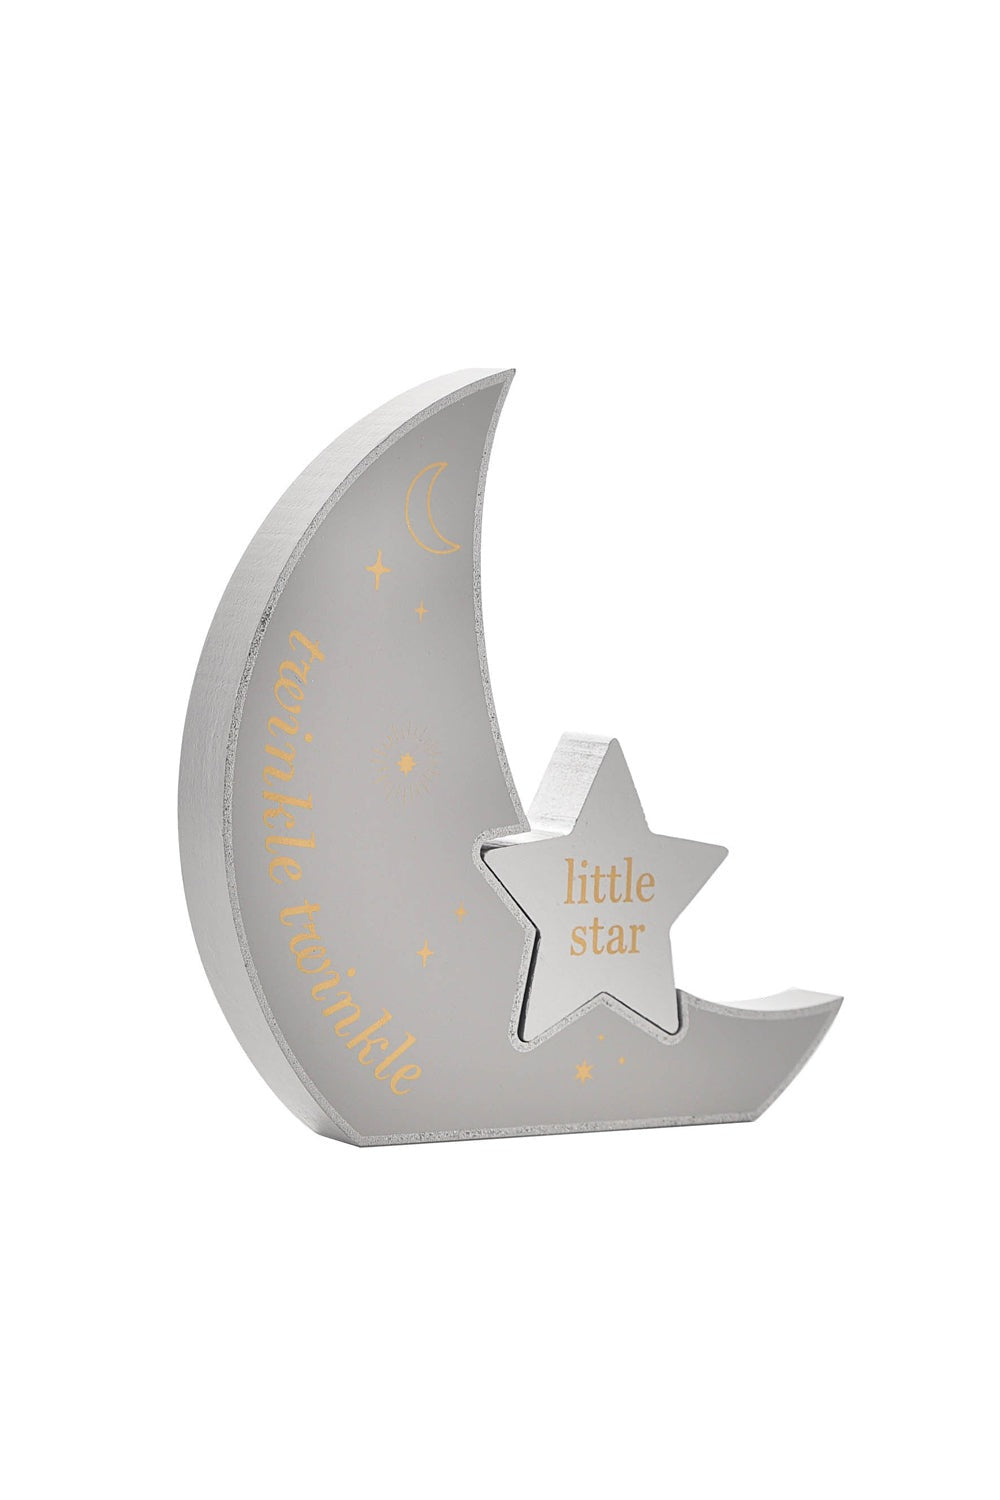 Bambino Bambino Wooden Moon Plaque &quot;Twinkle Twinkle&quot; 18cm 2 Shaws Department Stores